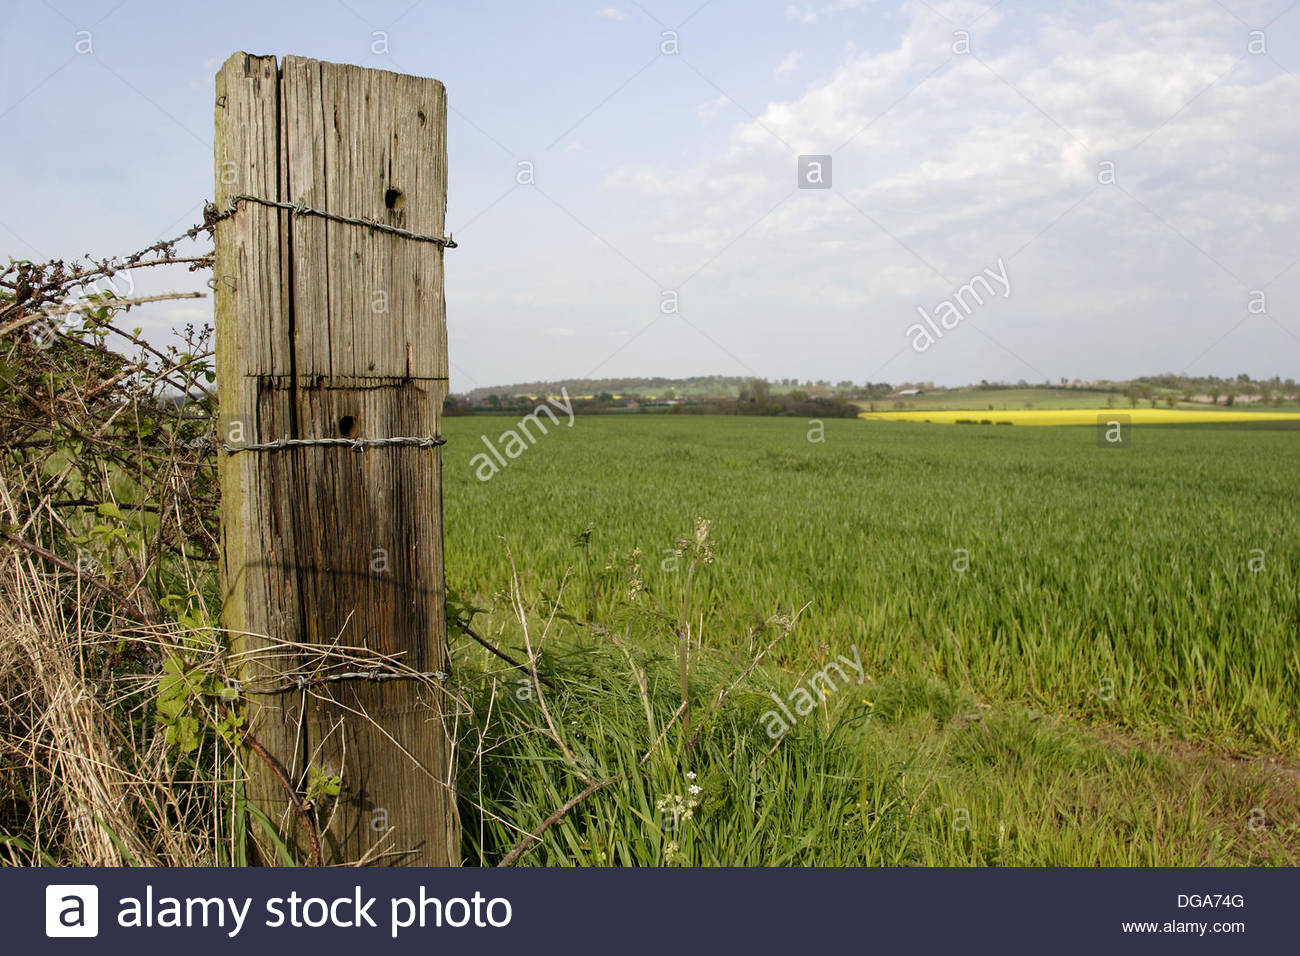 old-wooden-fence-post-in-field-close-up-england-uk-DGA74G.jpg